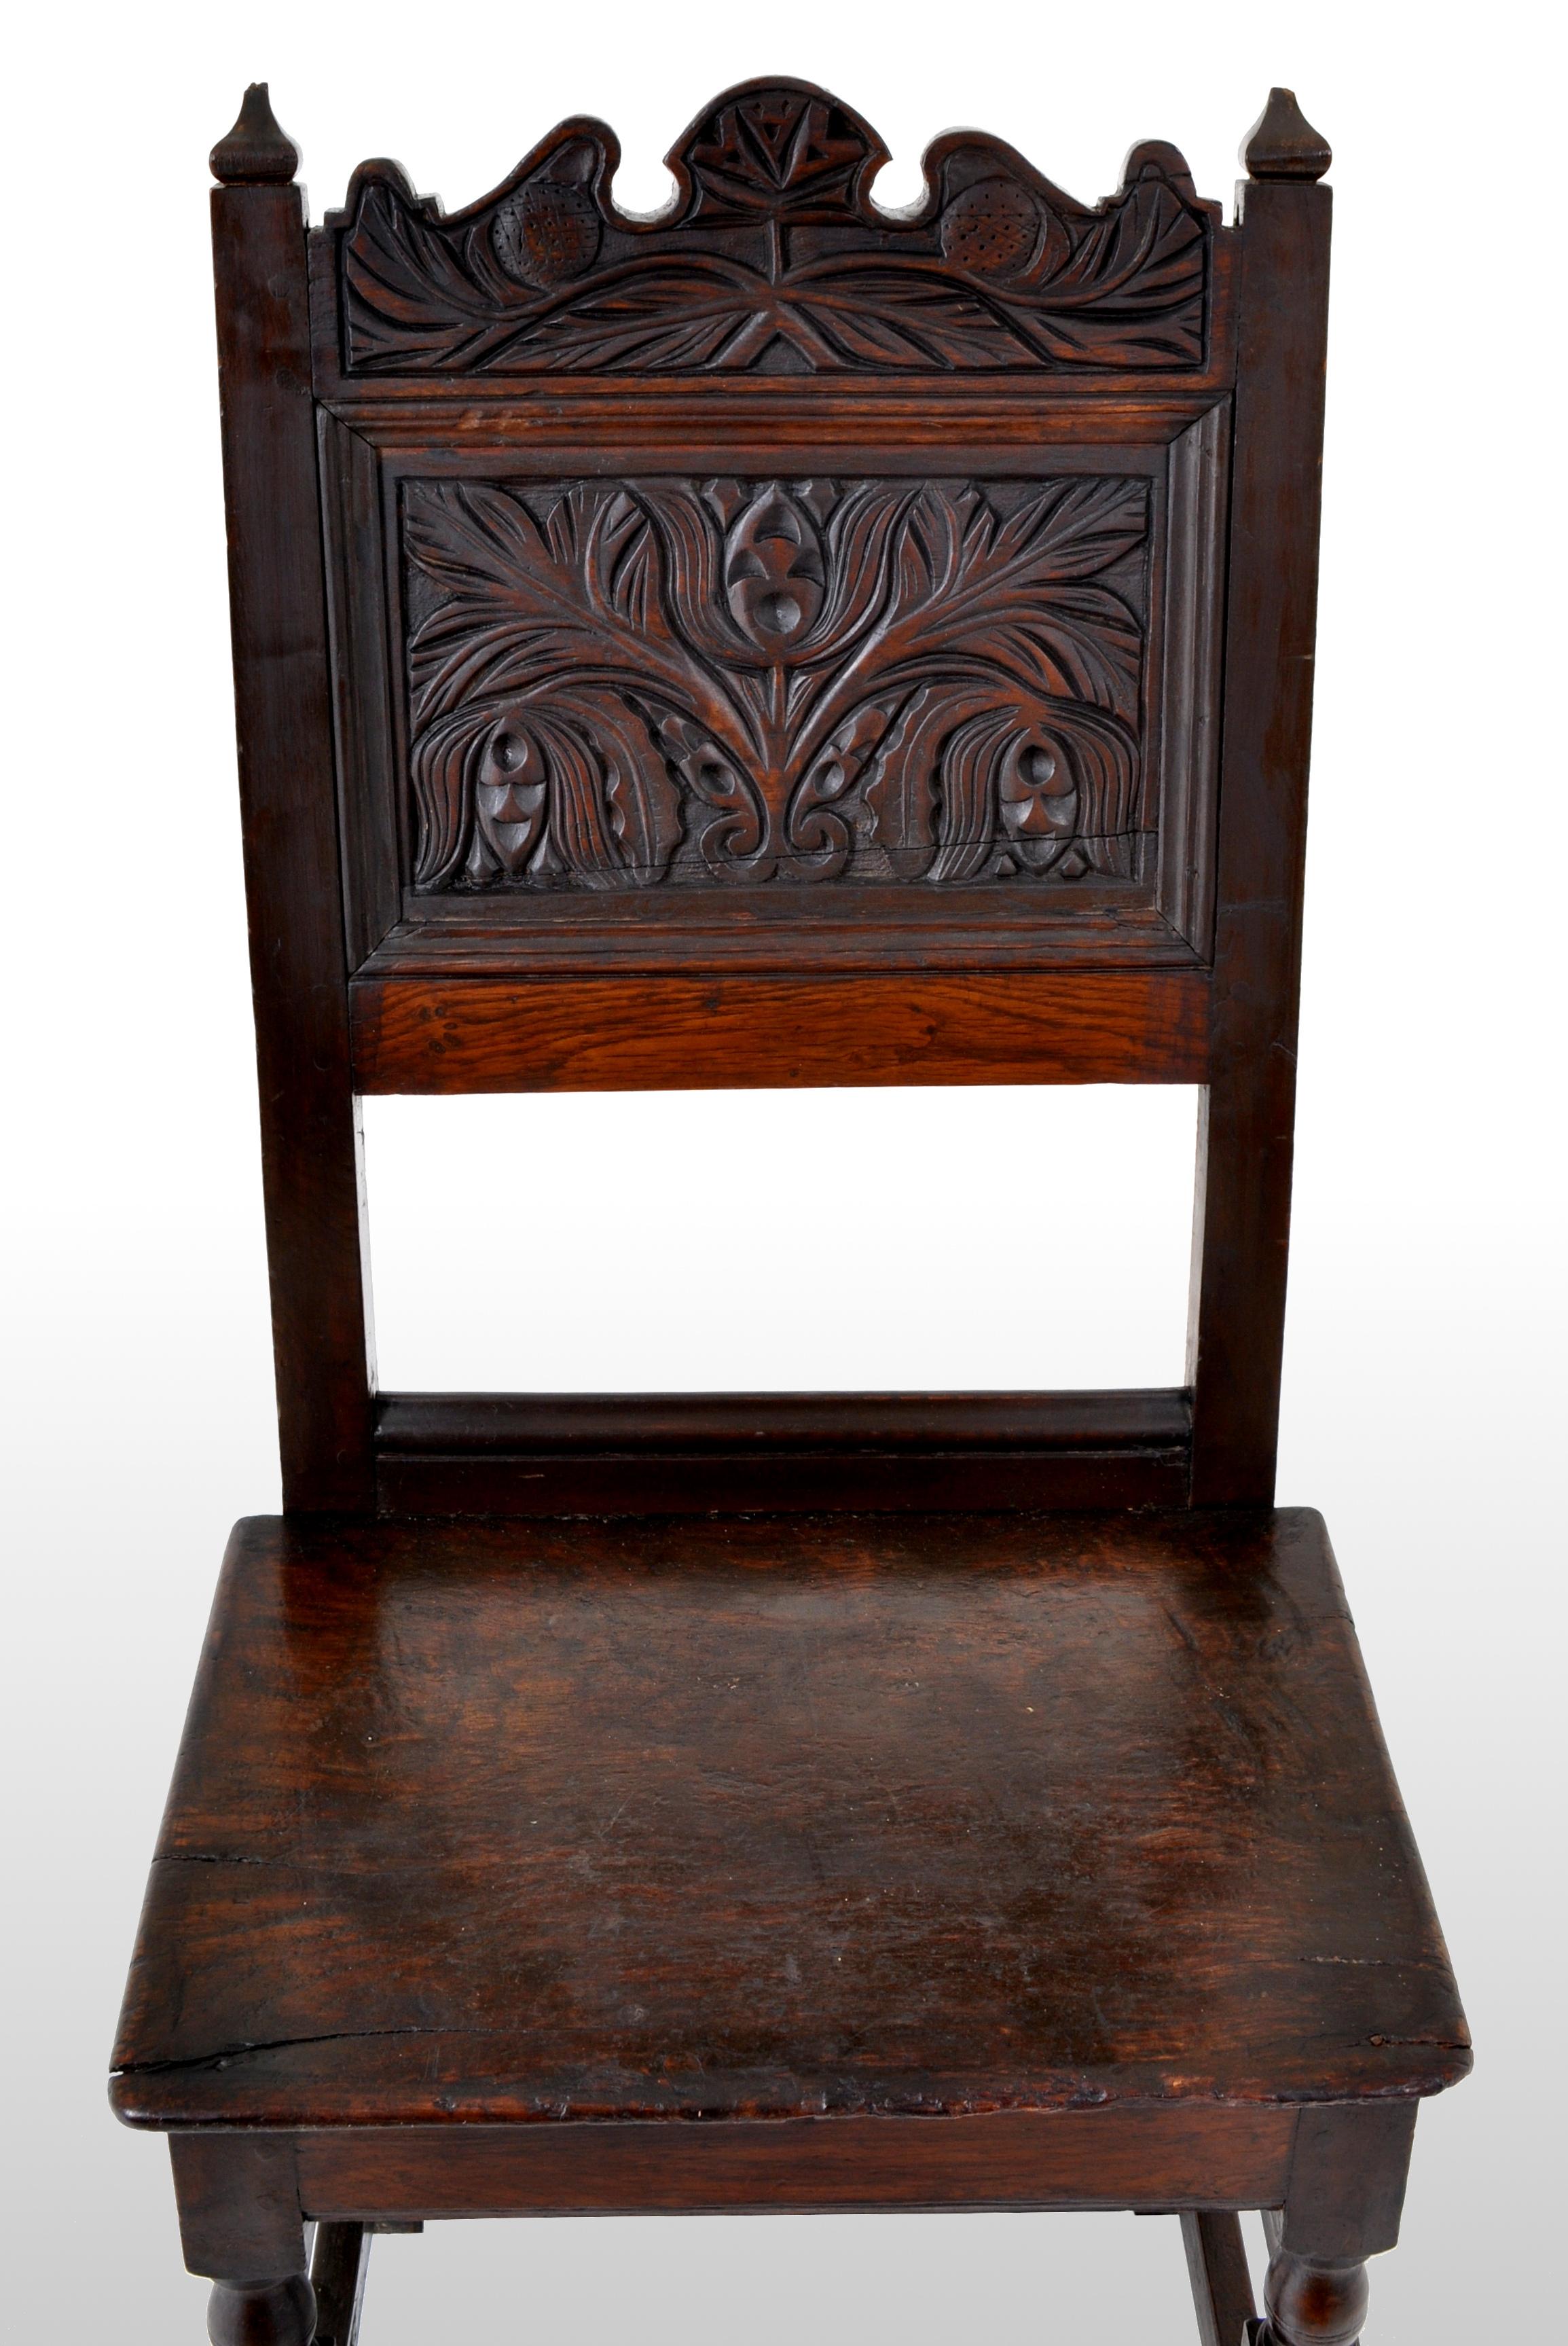 Hand-Carved Antique English 17th Century Jacobean Carved Oak Joined Chair, circa 1640